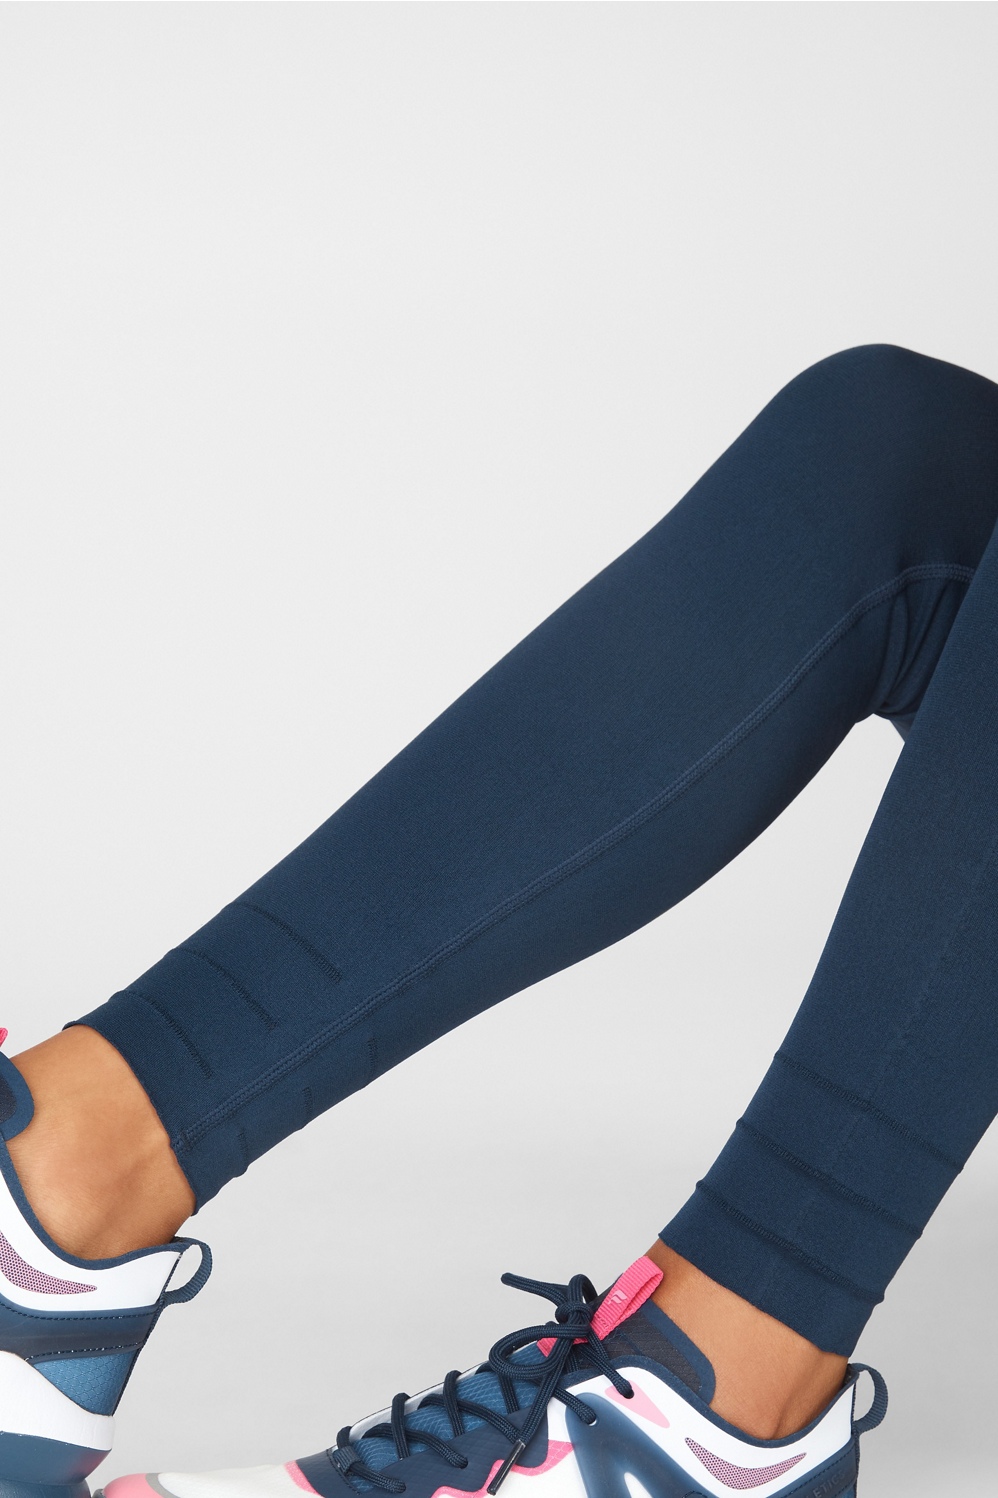 Fabletics SculptKnit® High-Waisted Leggings With Cross Back Pocket Detail  Blue Size XS - $19 - From revivalmdc